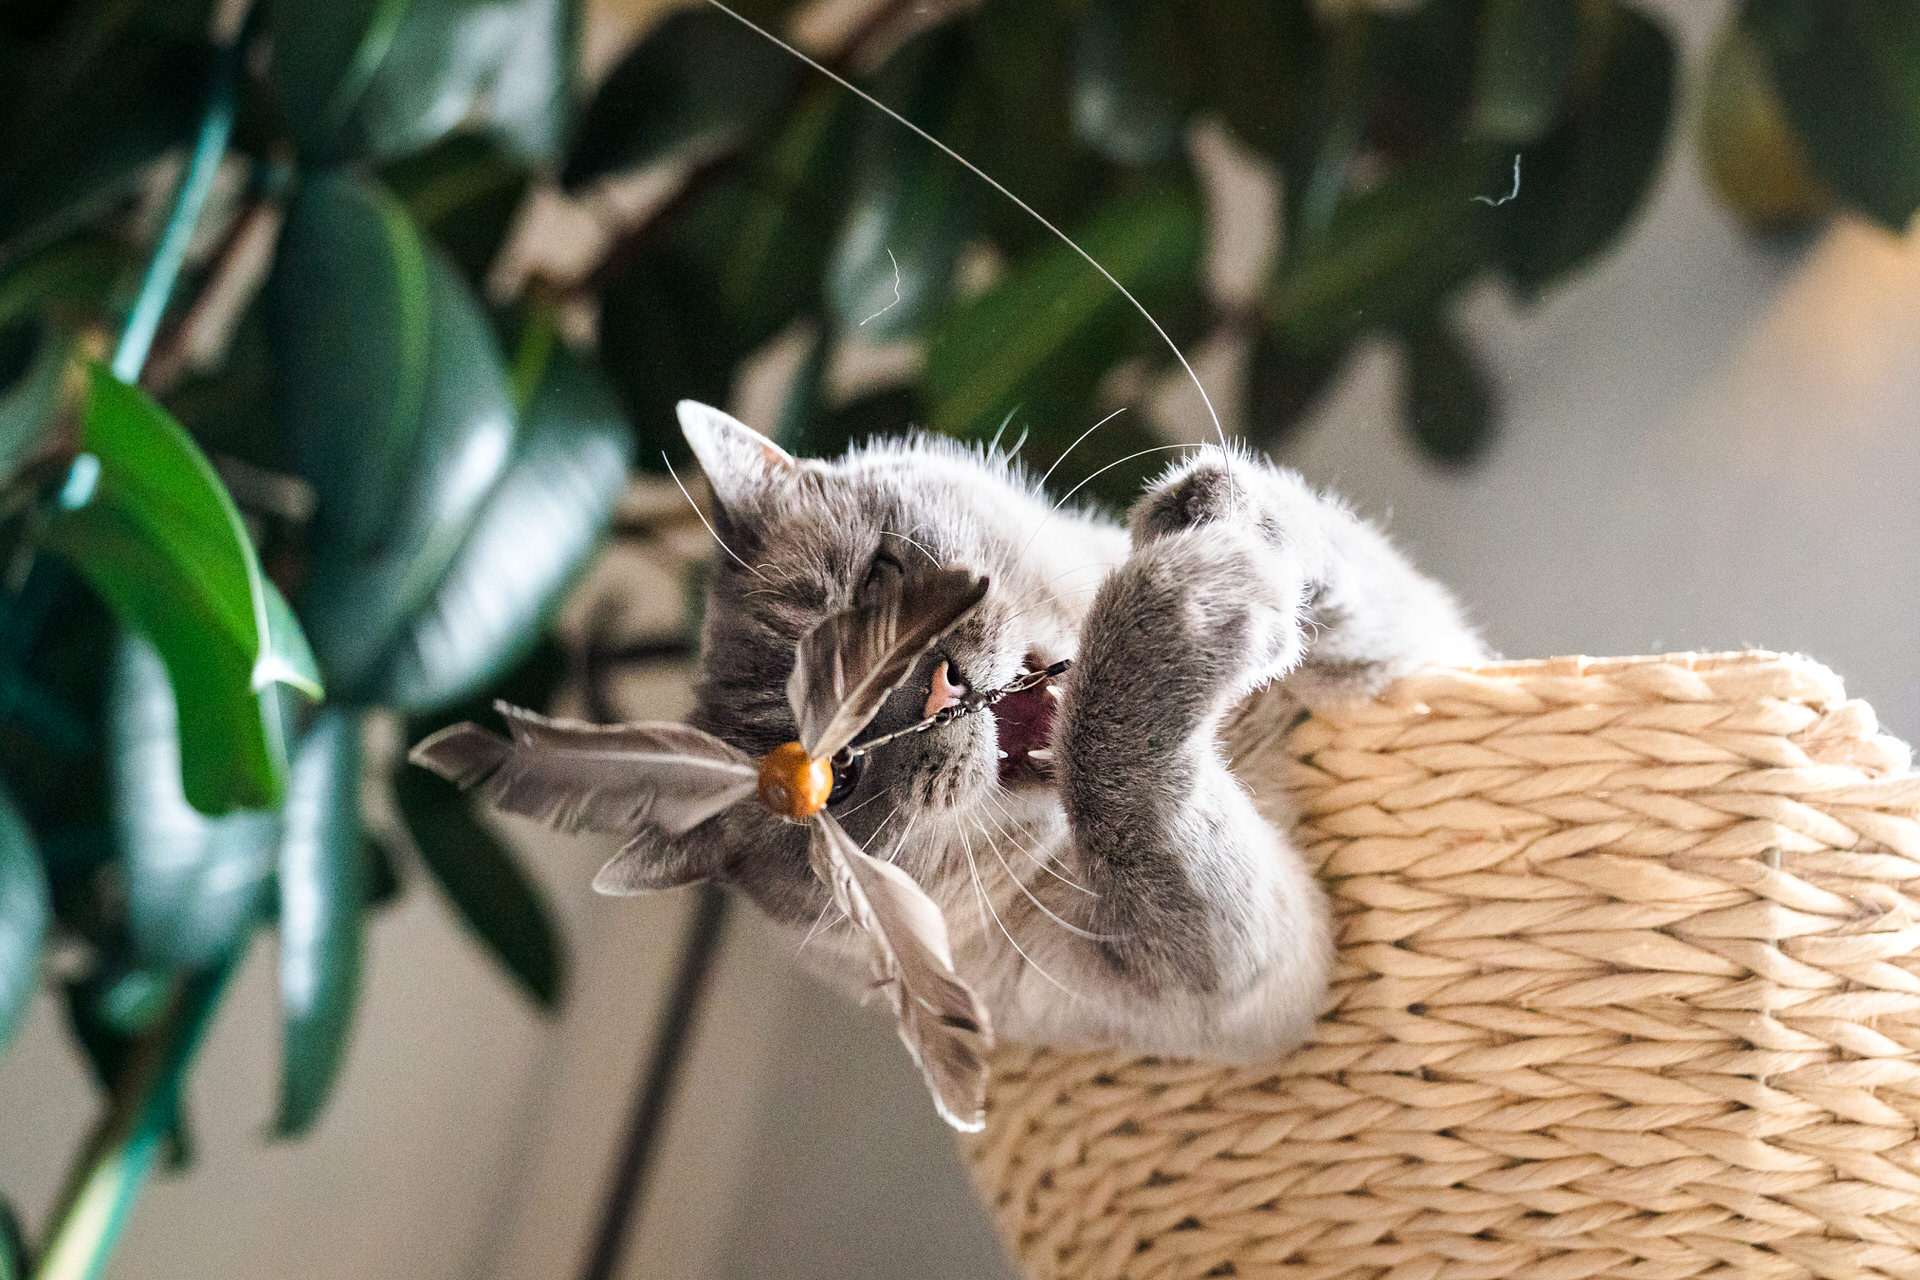 Cat catching bird toy in action